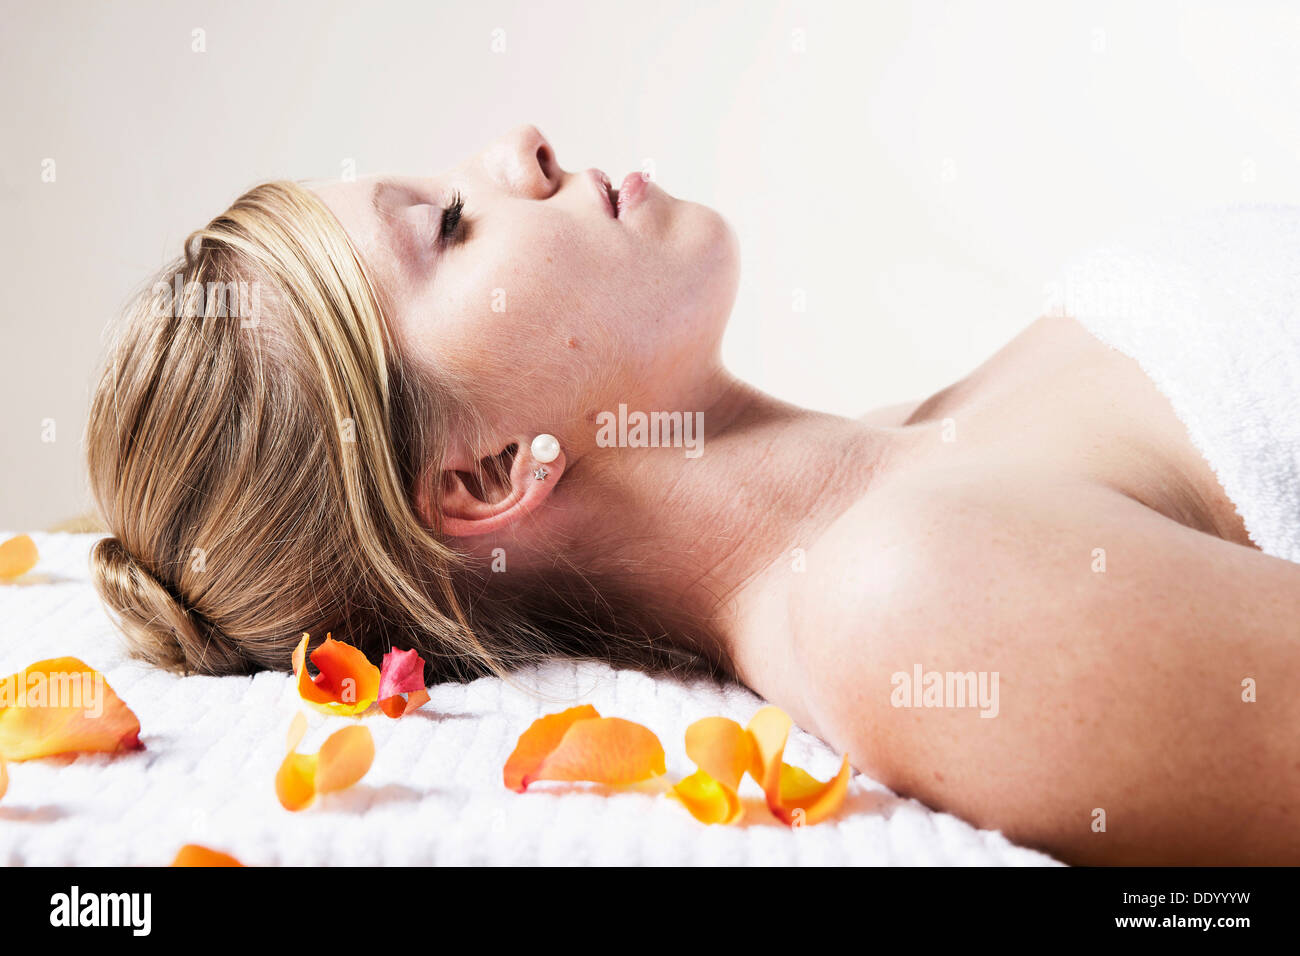 Young woman relaxing while lying on her back Banque D'Images